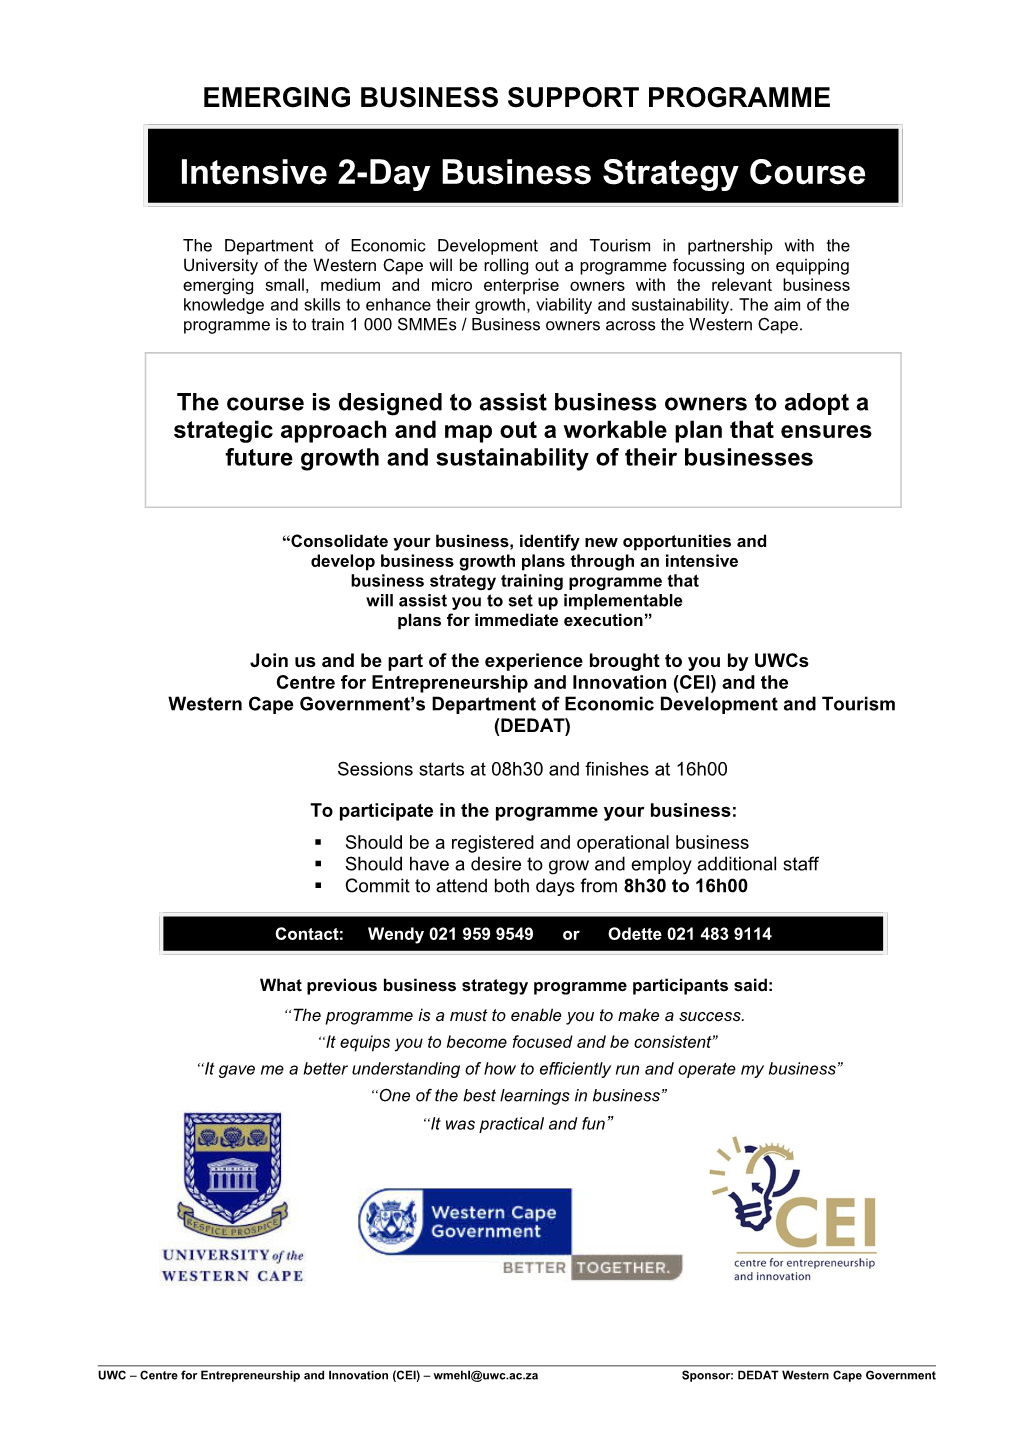 Emerging Business Support Programme